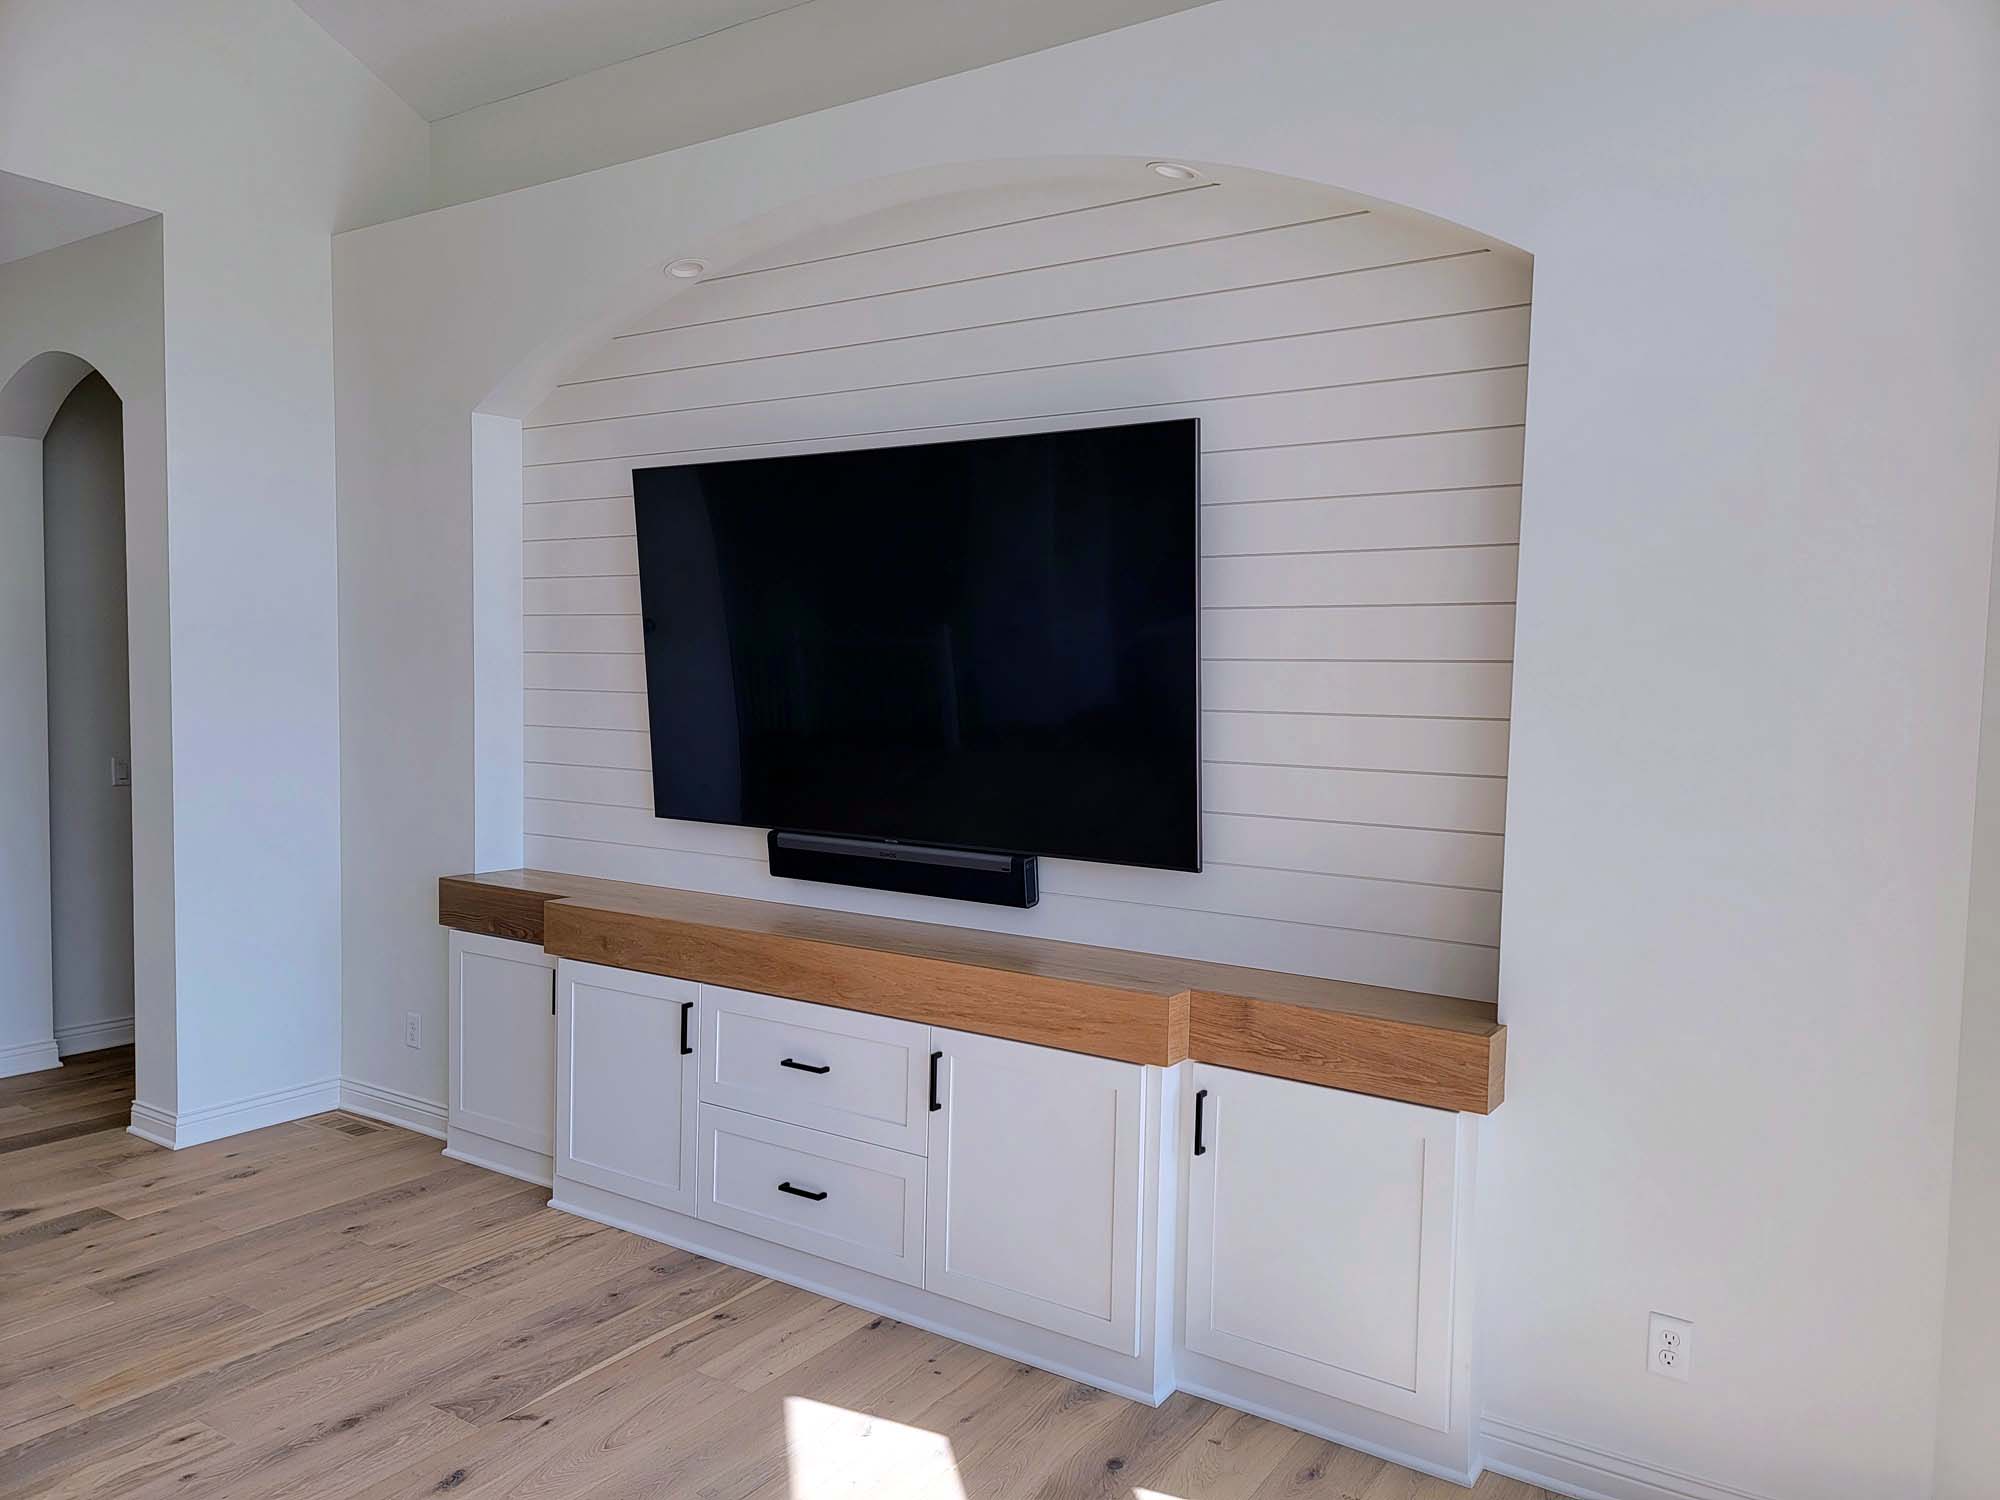 Updated media wall with shiplap